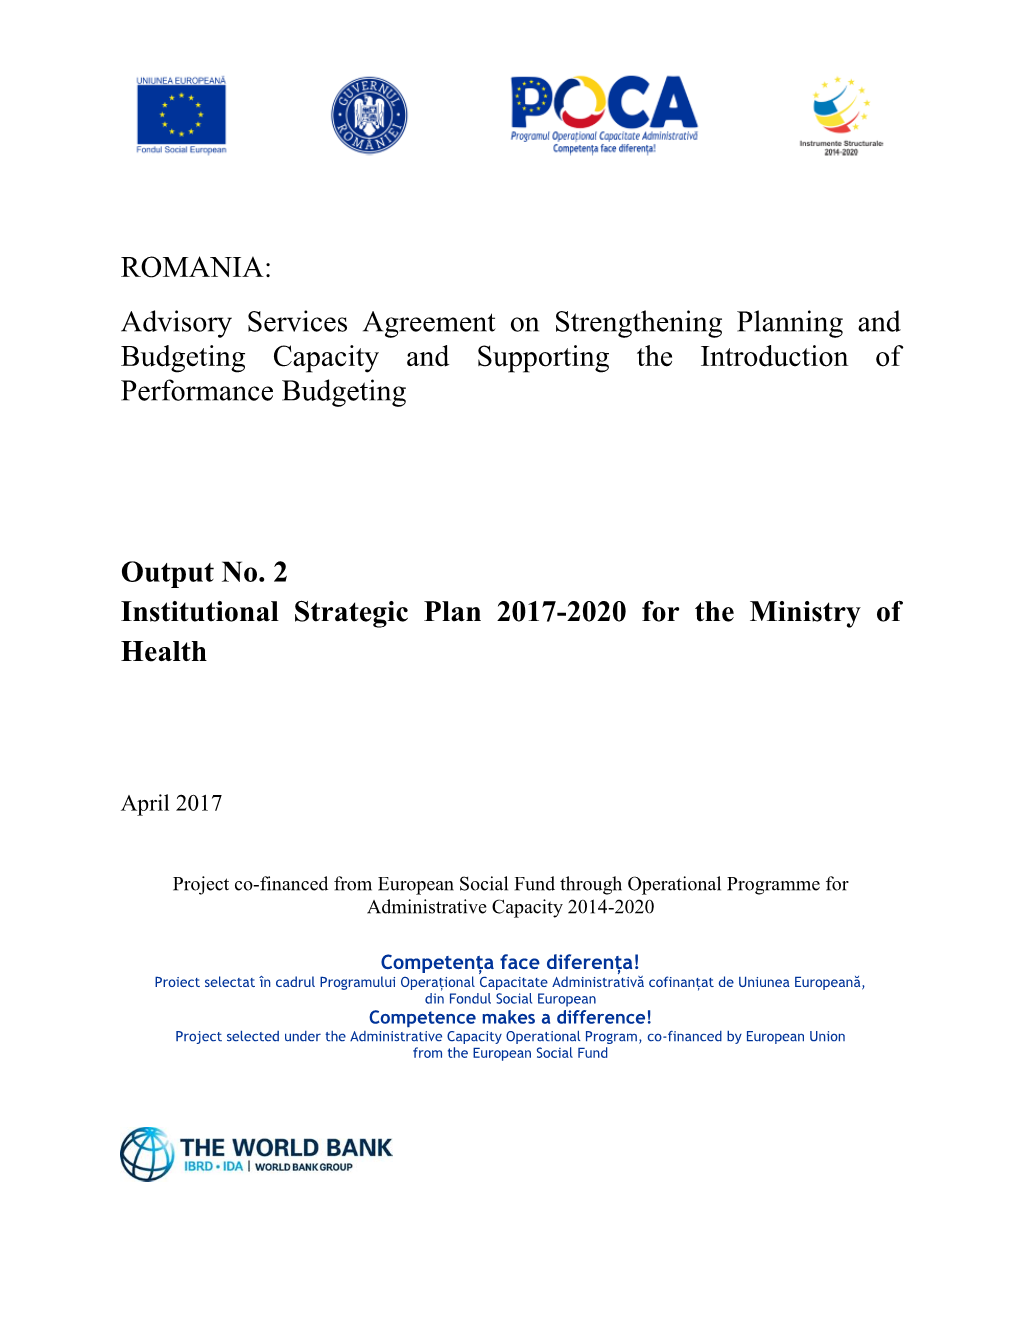 ROMANIA: Advisory Services Agreement on Strengthening Planning and Budgeting Capacity and Supporting the Introduction of Performance Budgeting